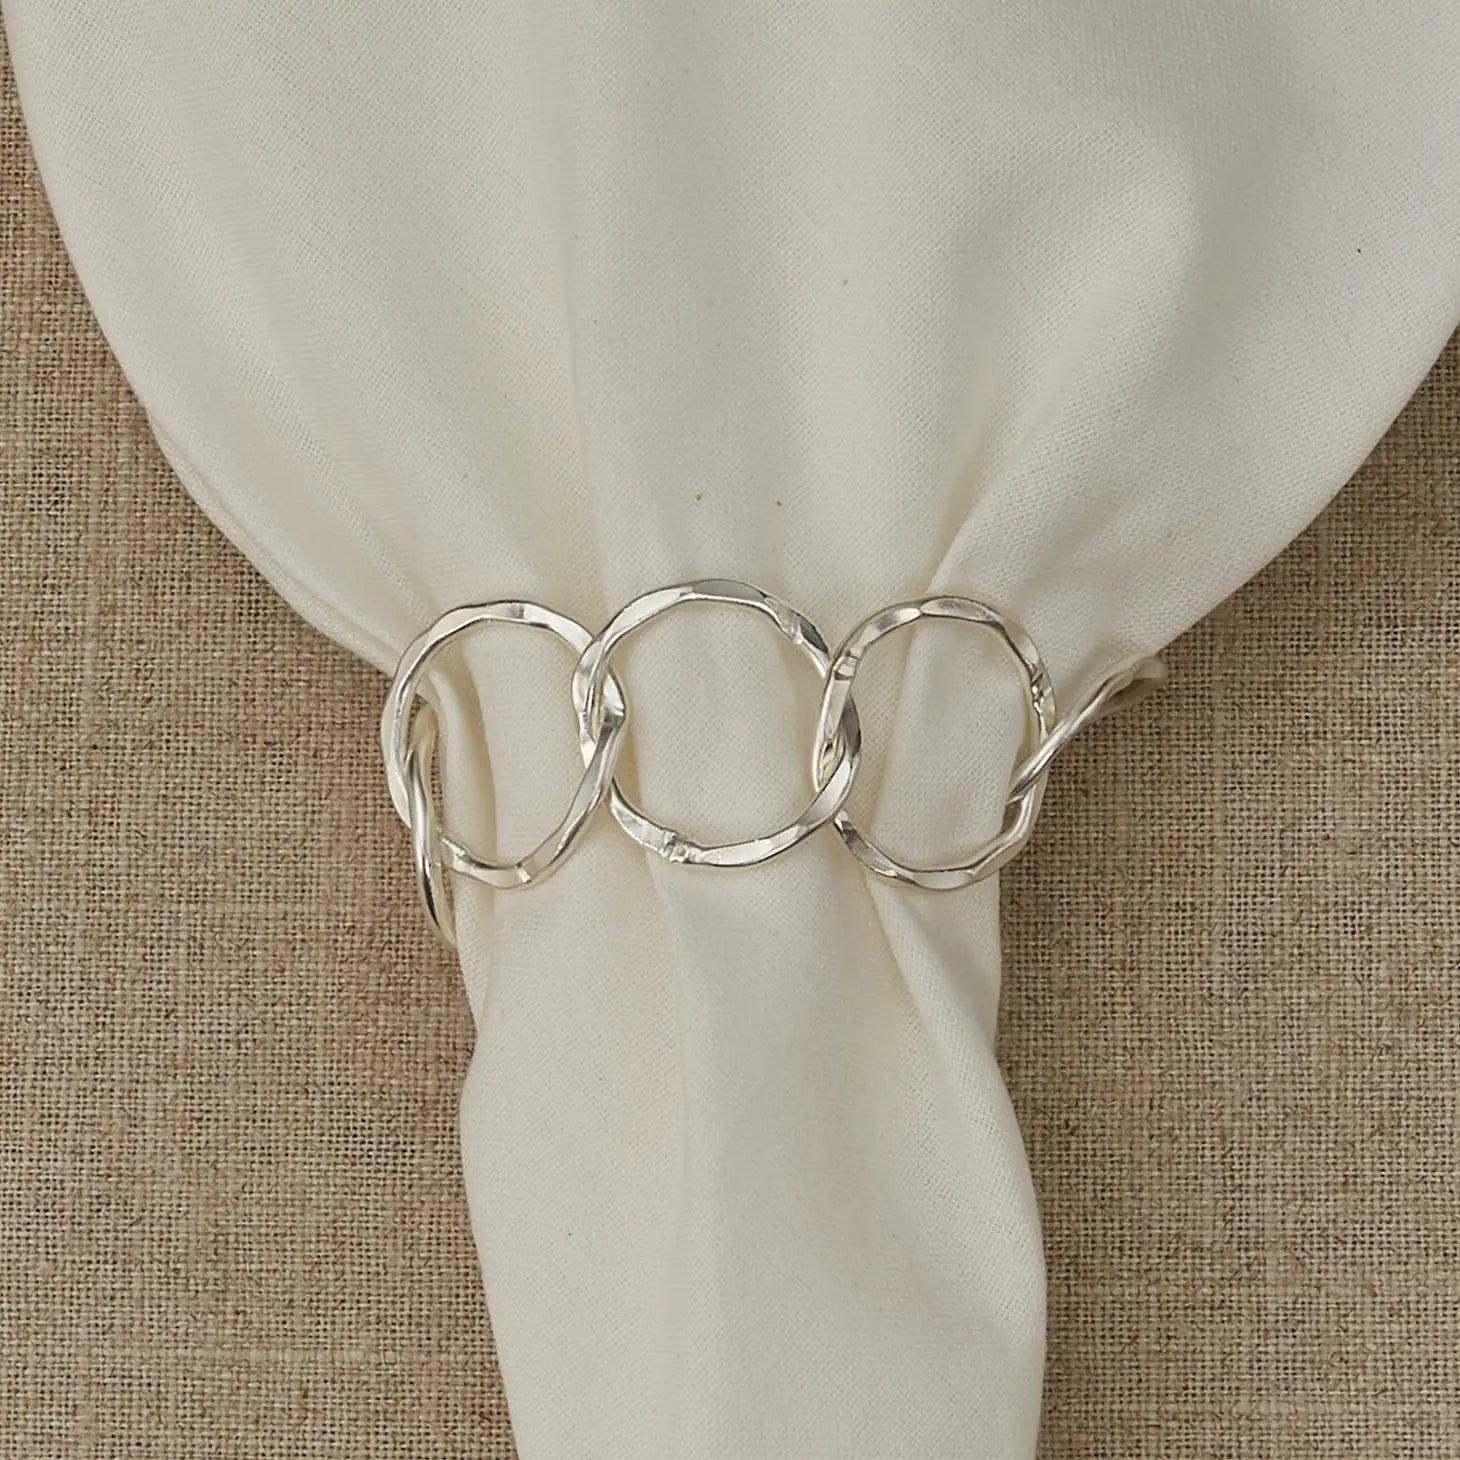 silver chainlink metal napkin ring white napkin with beige textured fabric background